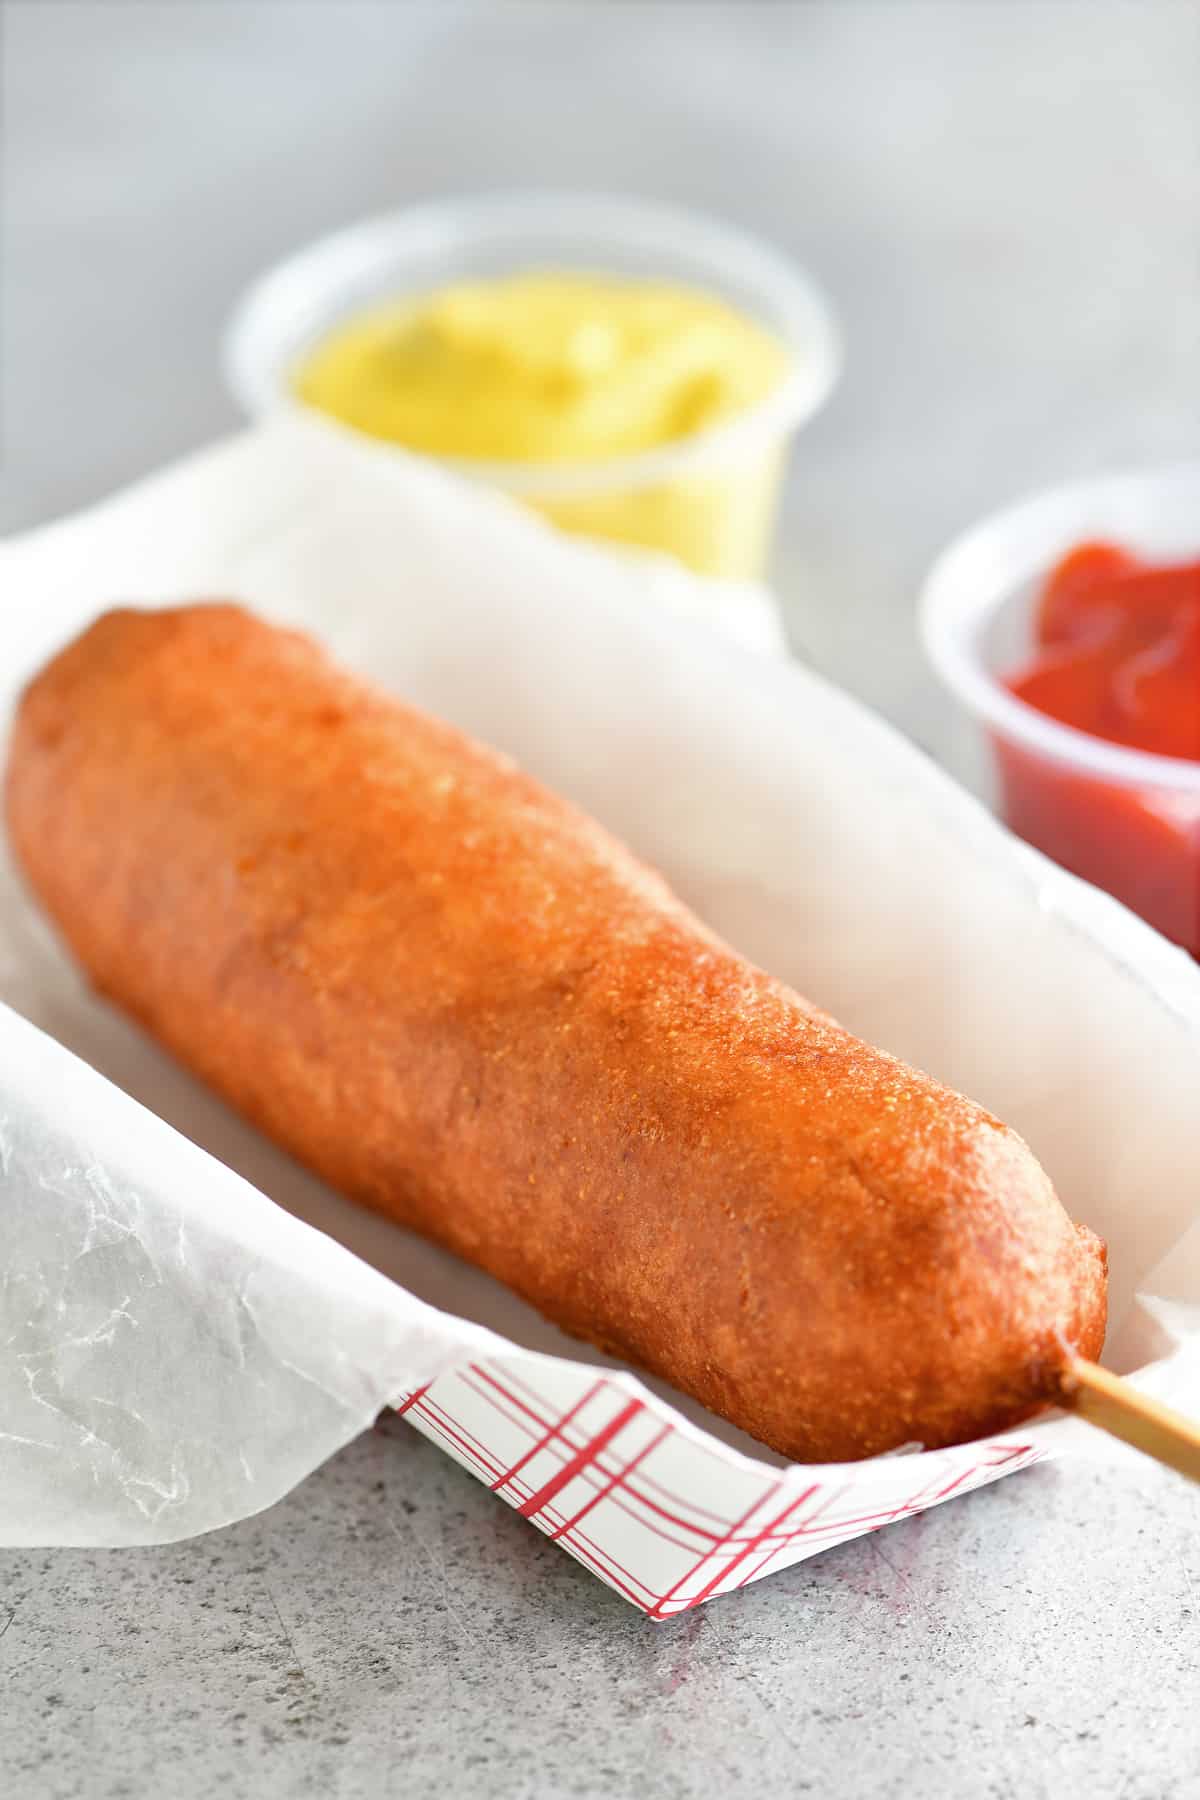 a golden fried corn dog on a red and white paper serving tray